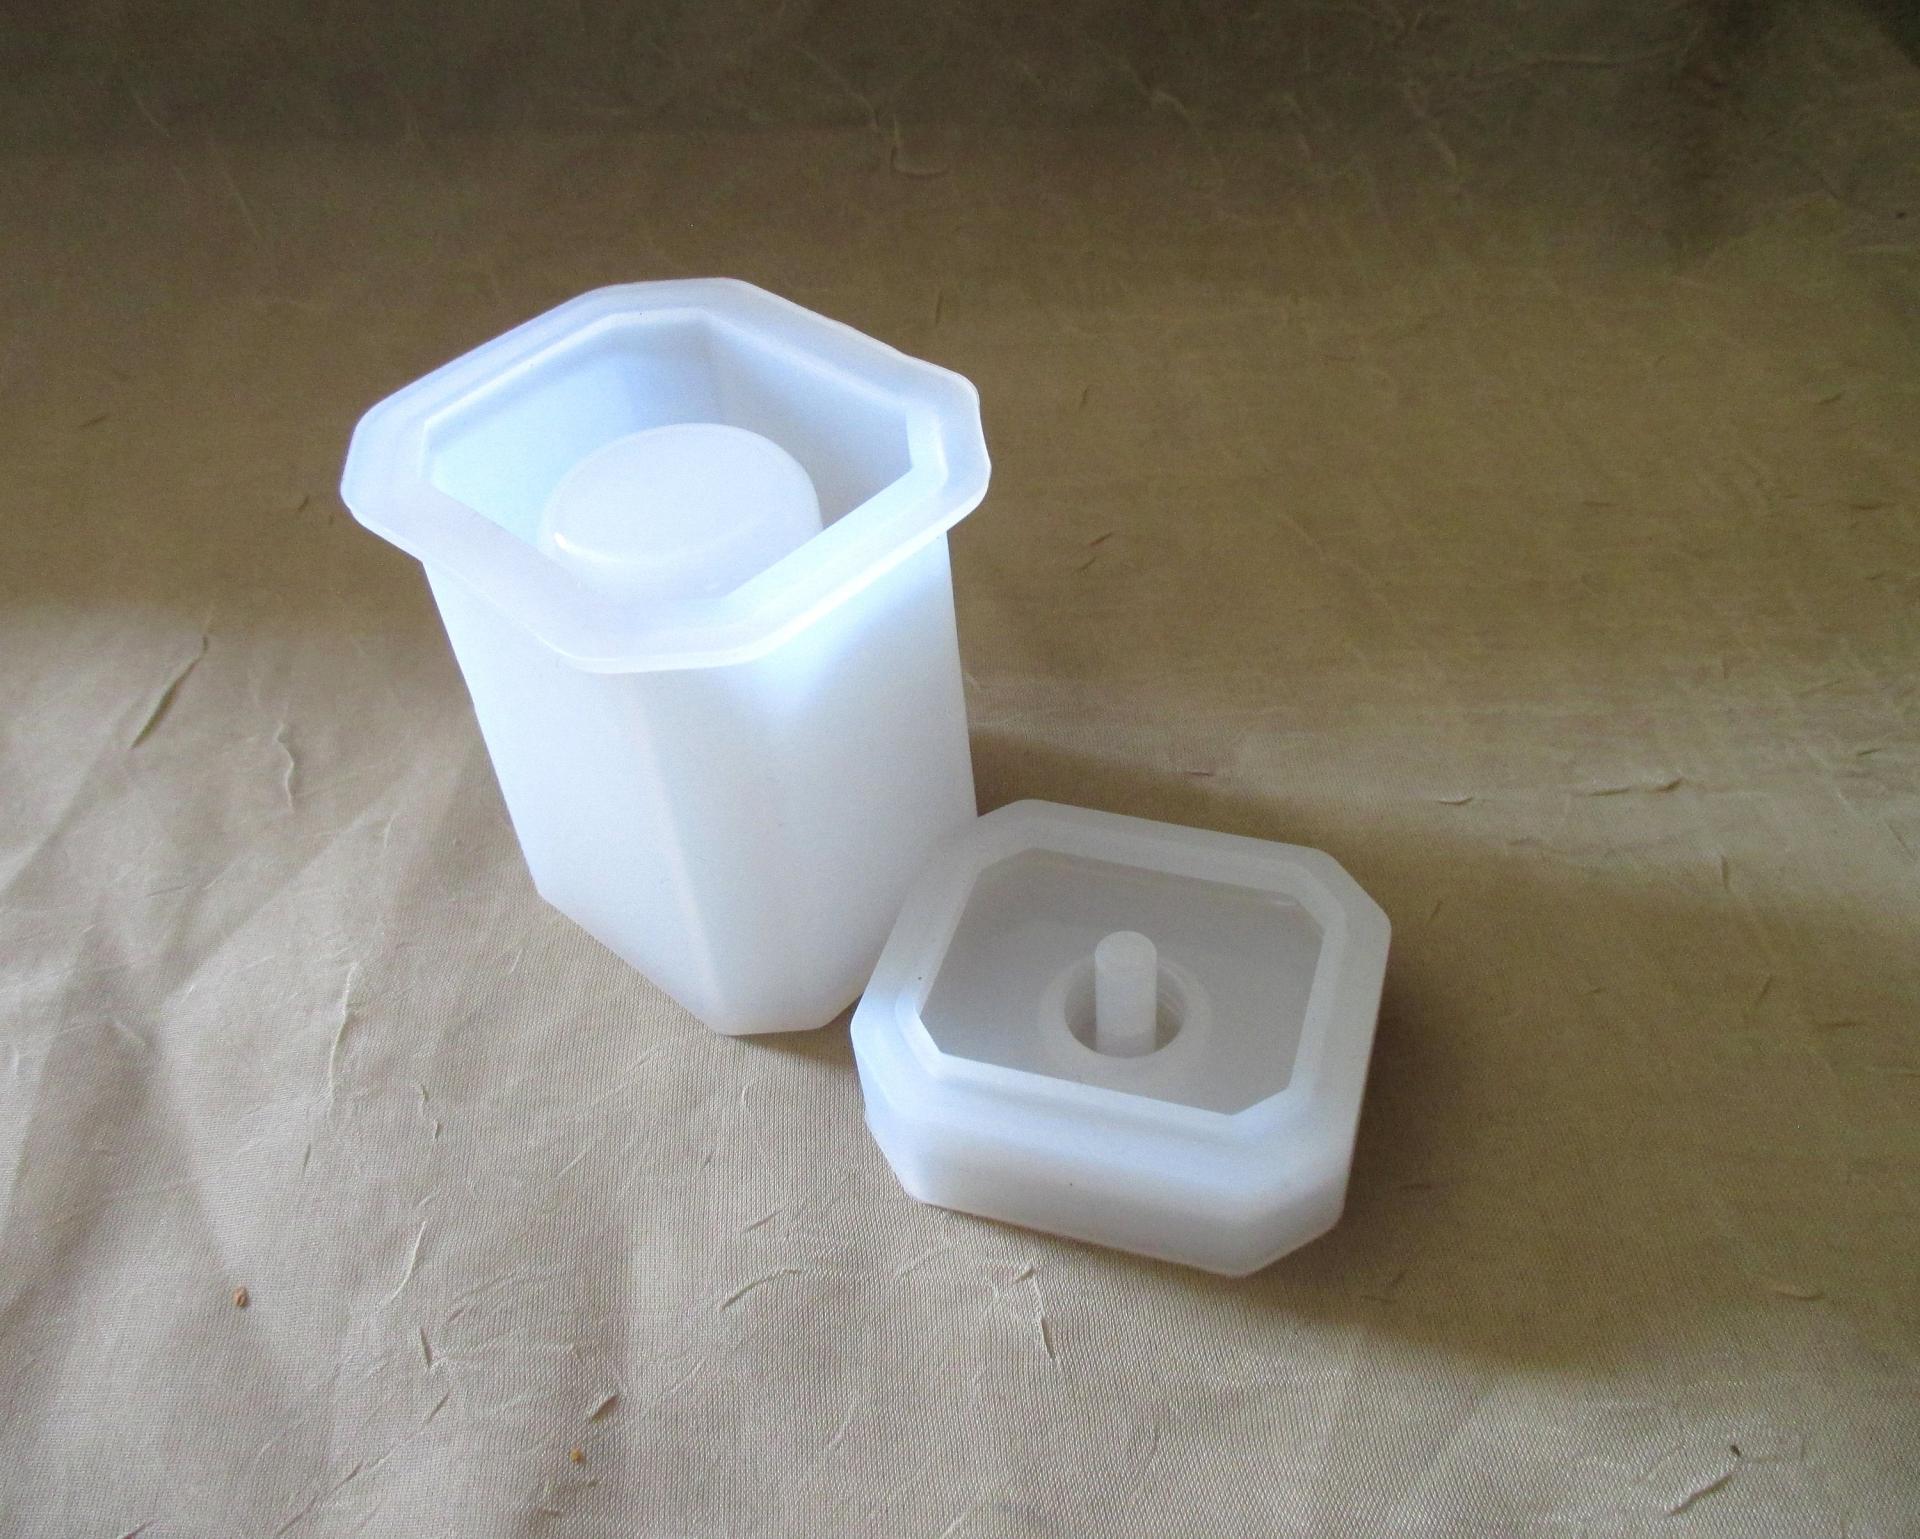 Mold - Perfume Bottle Casting Mold - for Epoxy, Clay or other casting medium